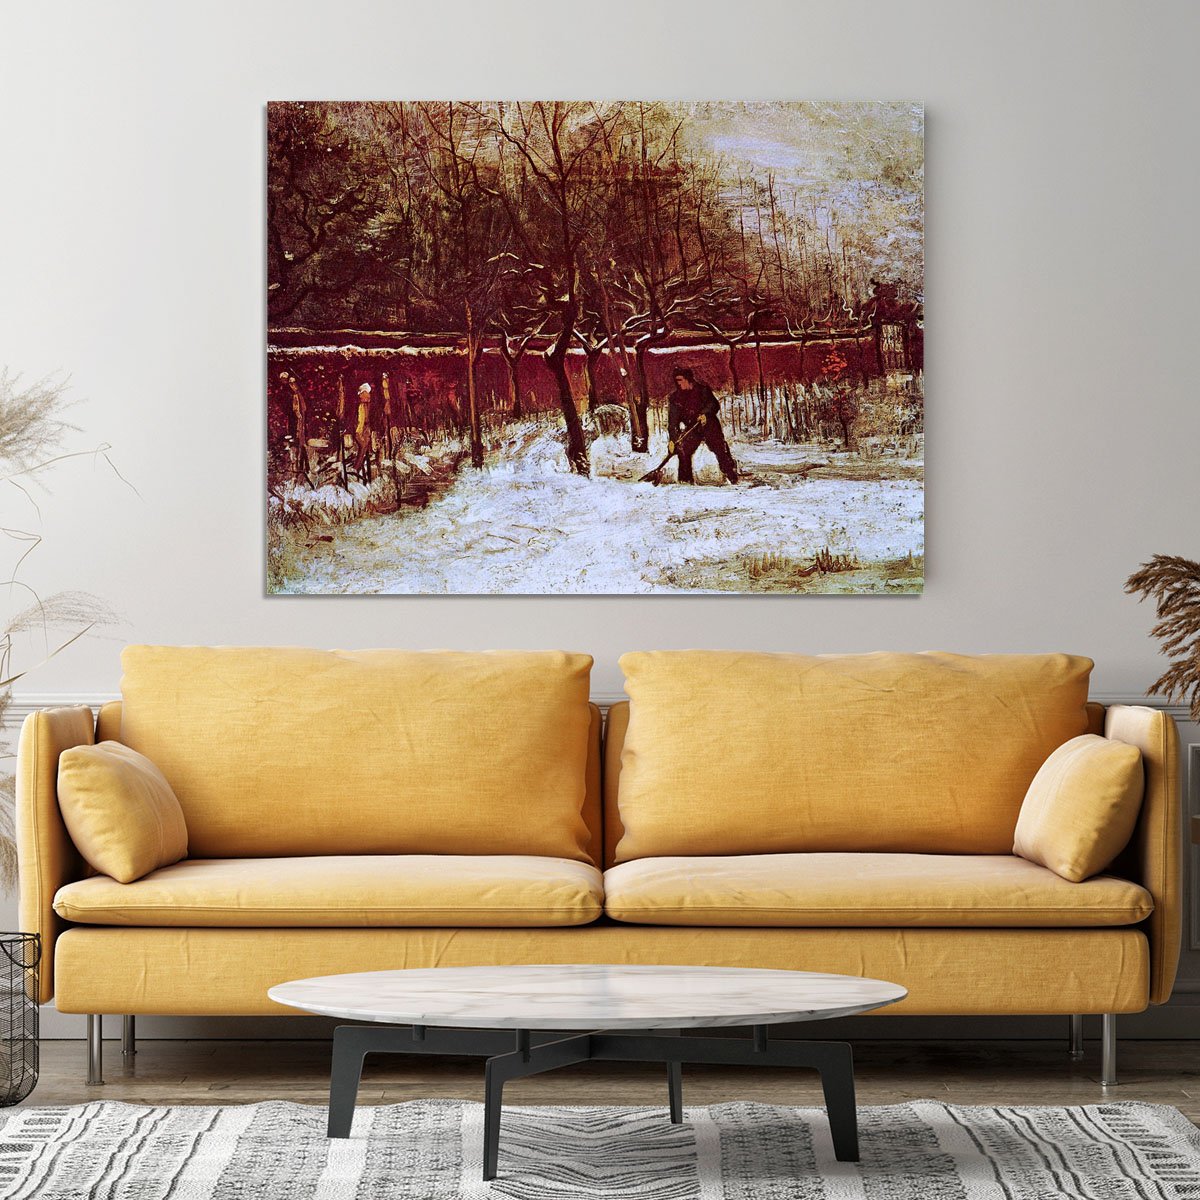 The Parsonage Garden at Nuenen in the Snow by Van Gogh Canvas Print or Poster